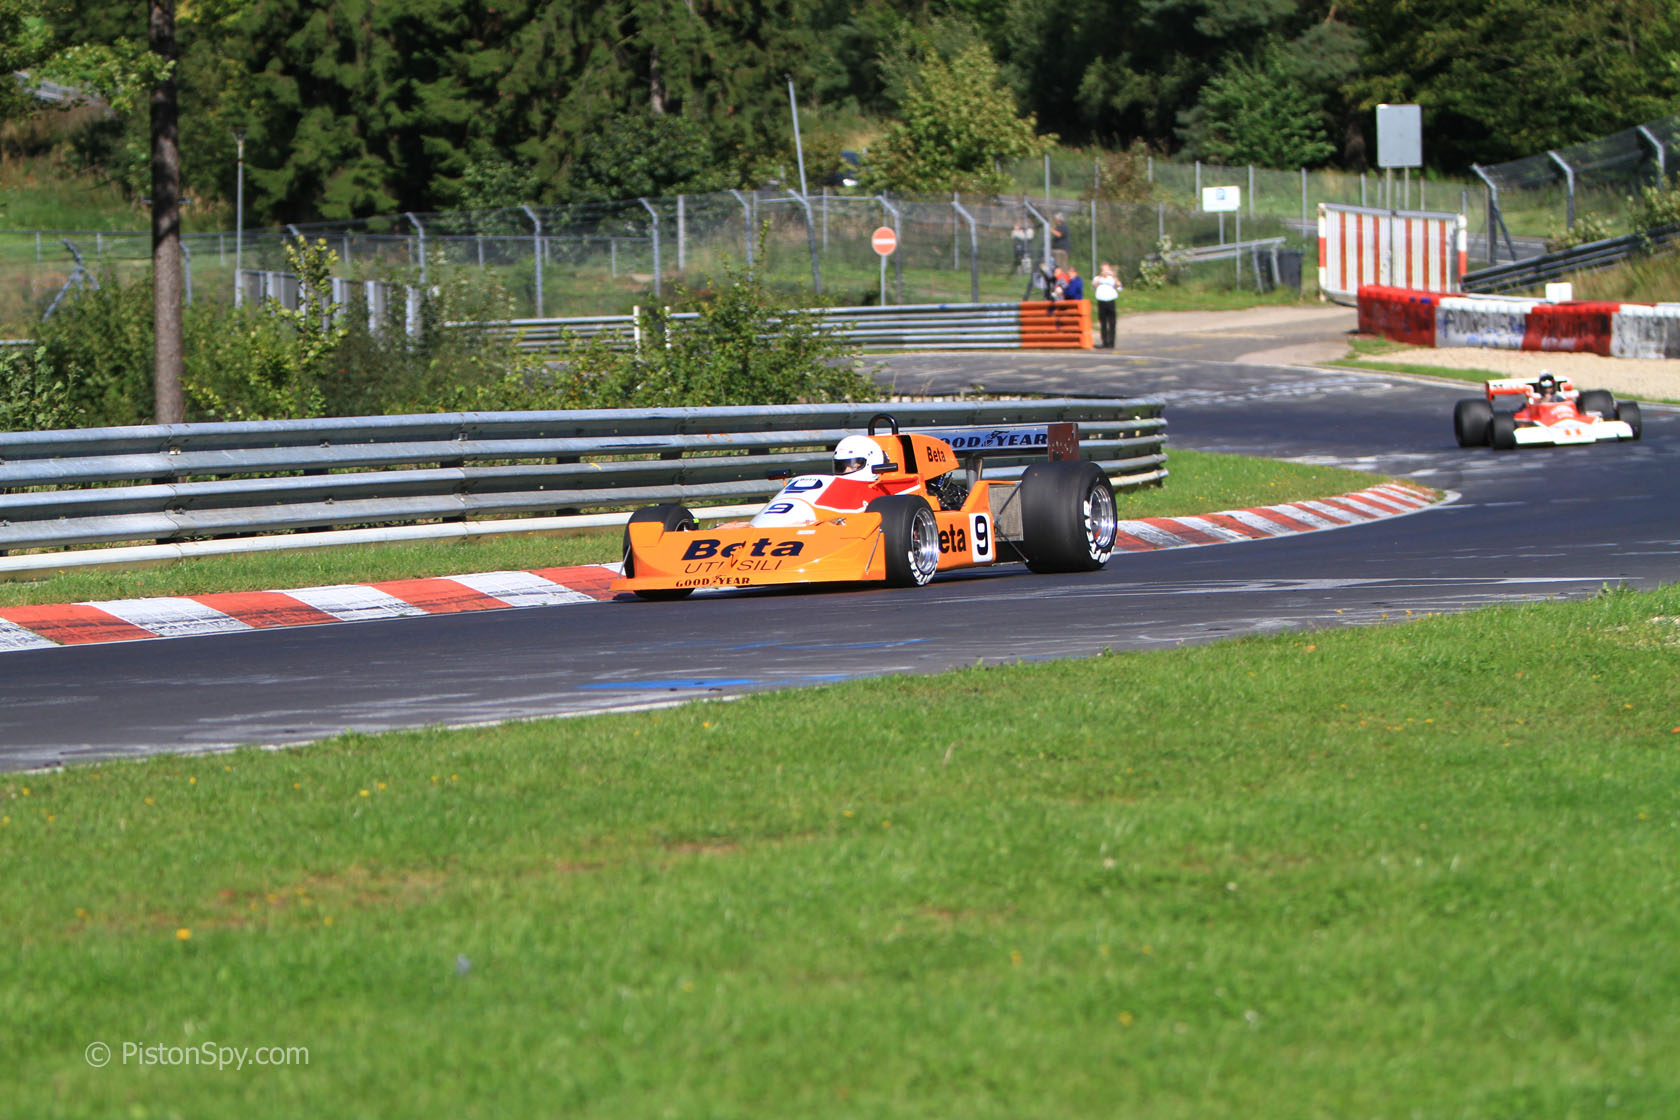 March 761, Nurburgring Nordschleife, Rush filming, 2011 - F1 Fanatic